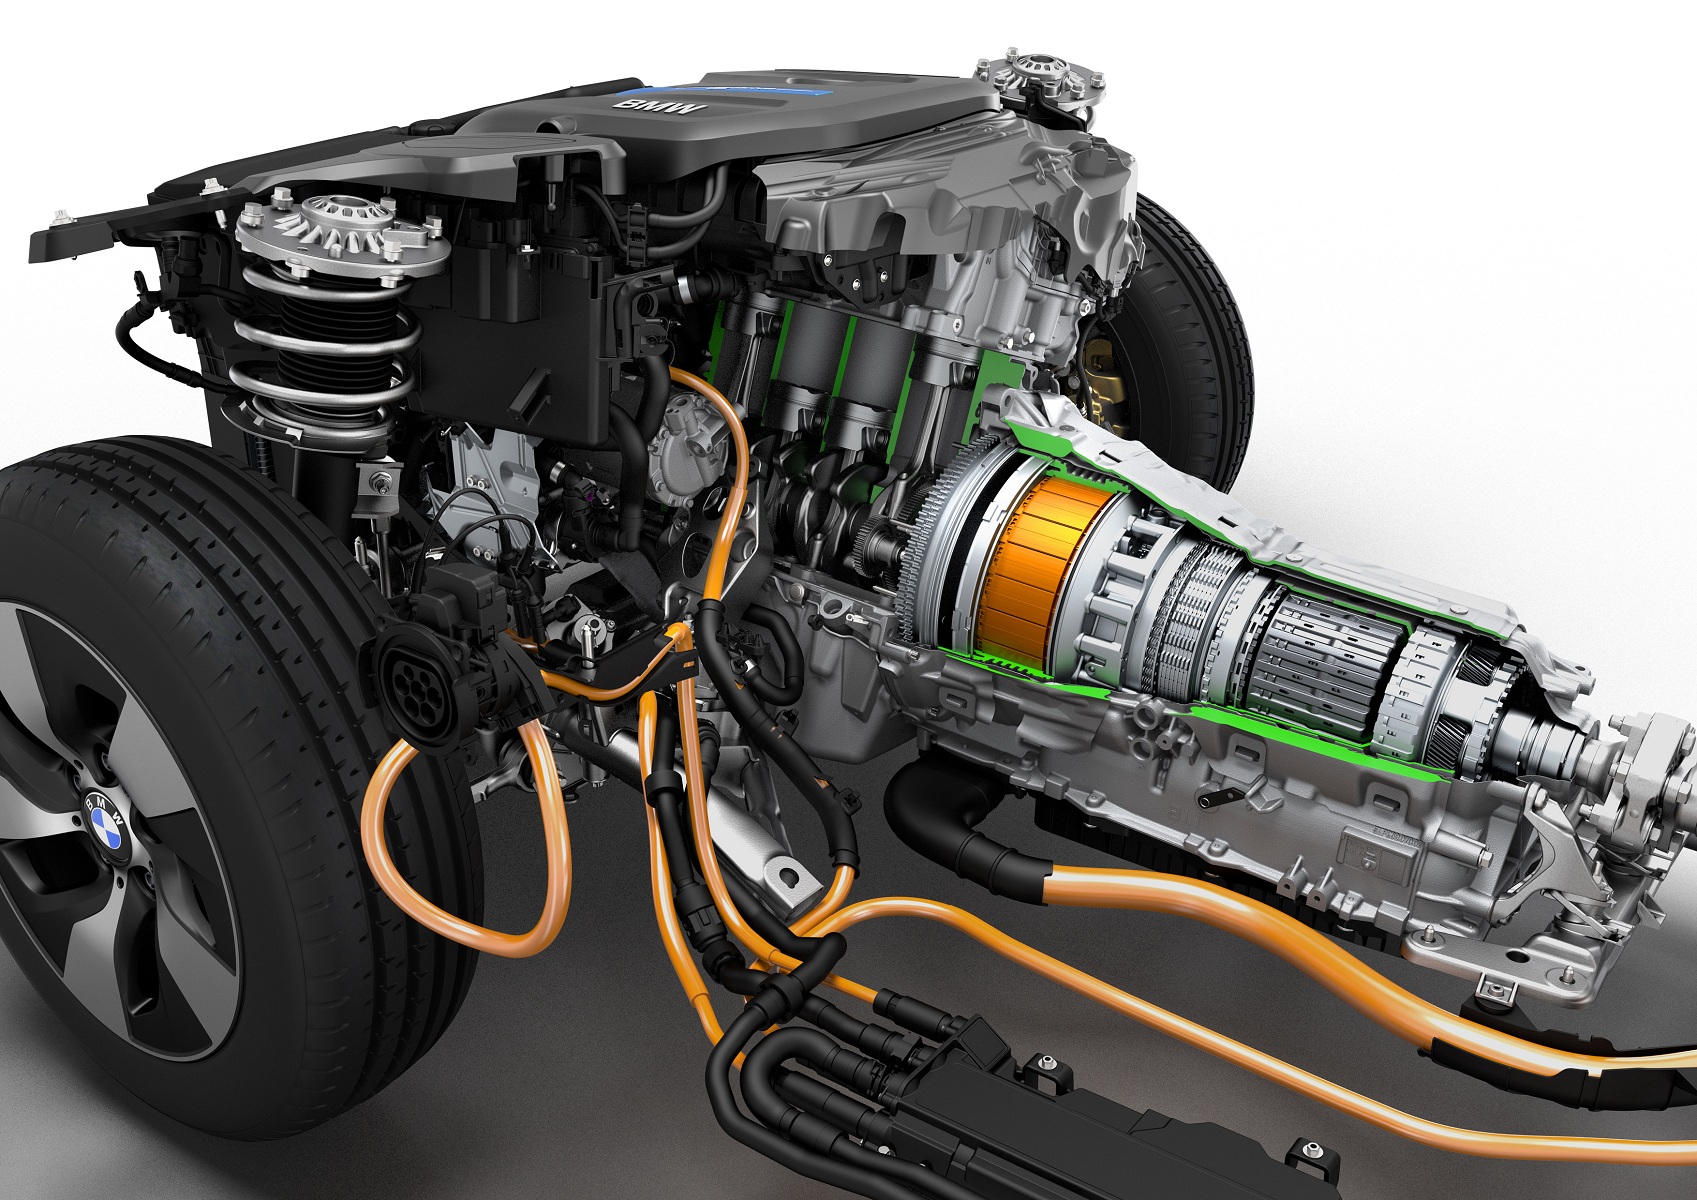 Internal combustion engine, electric motor and transmission